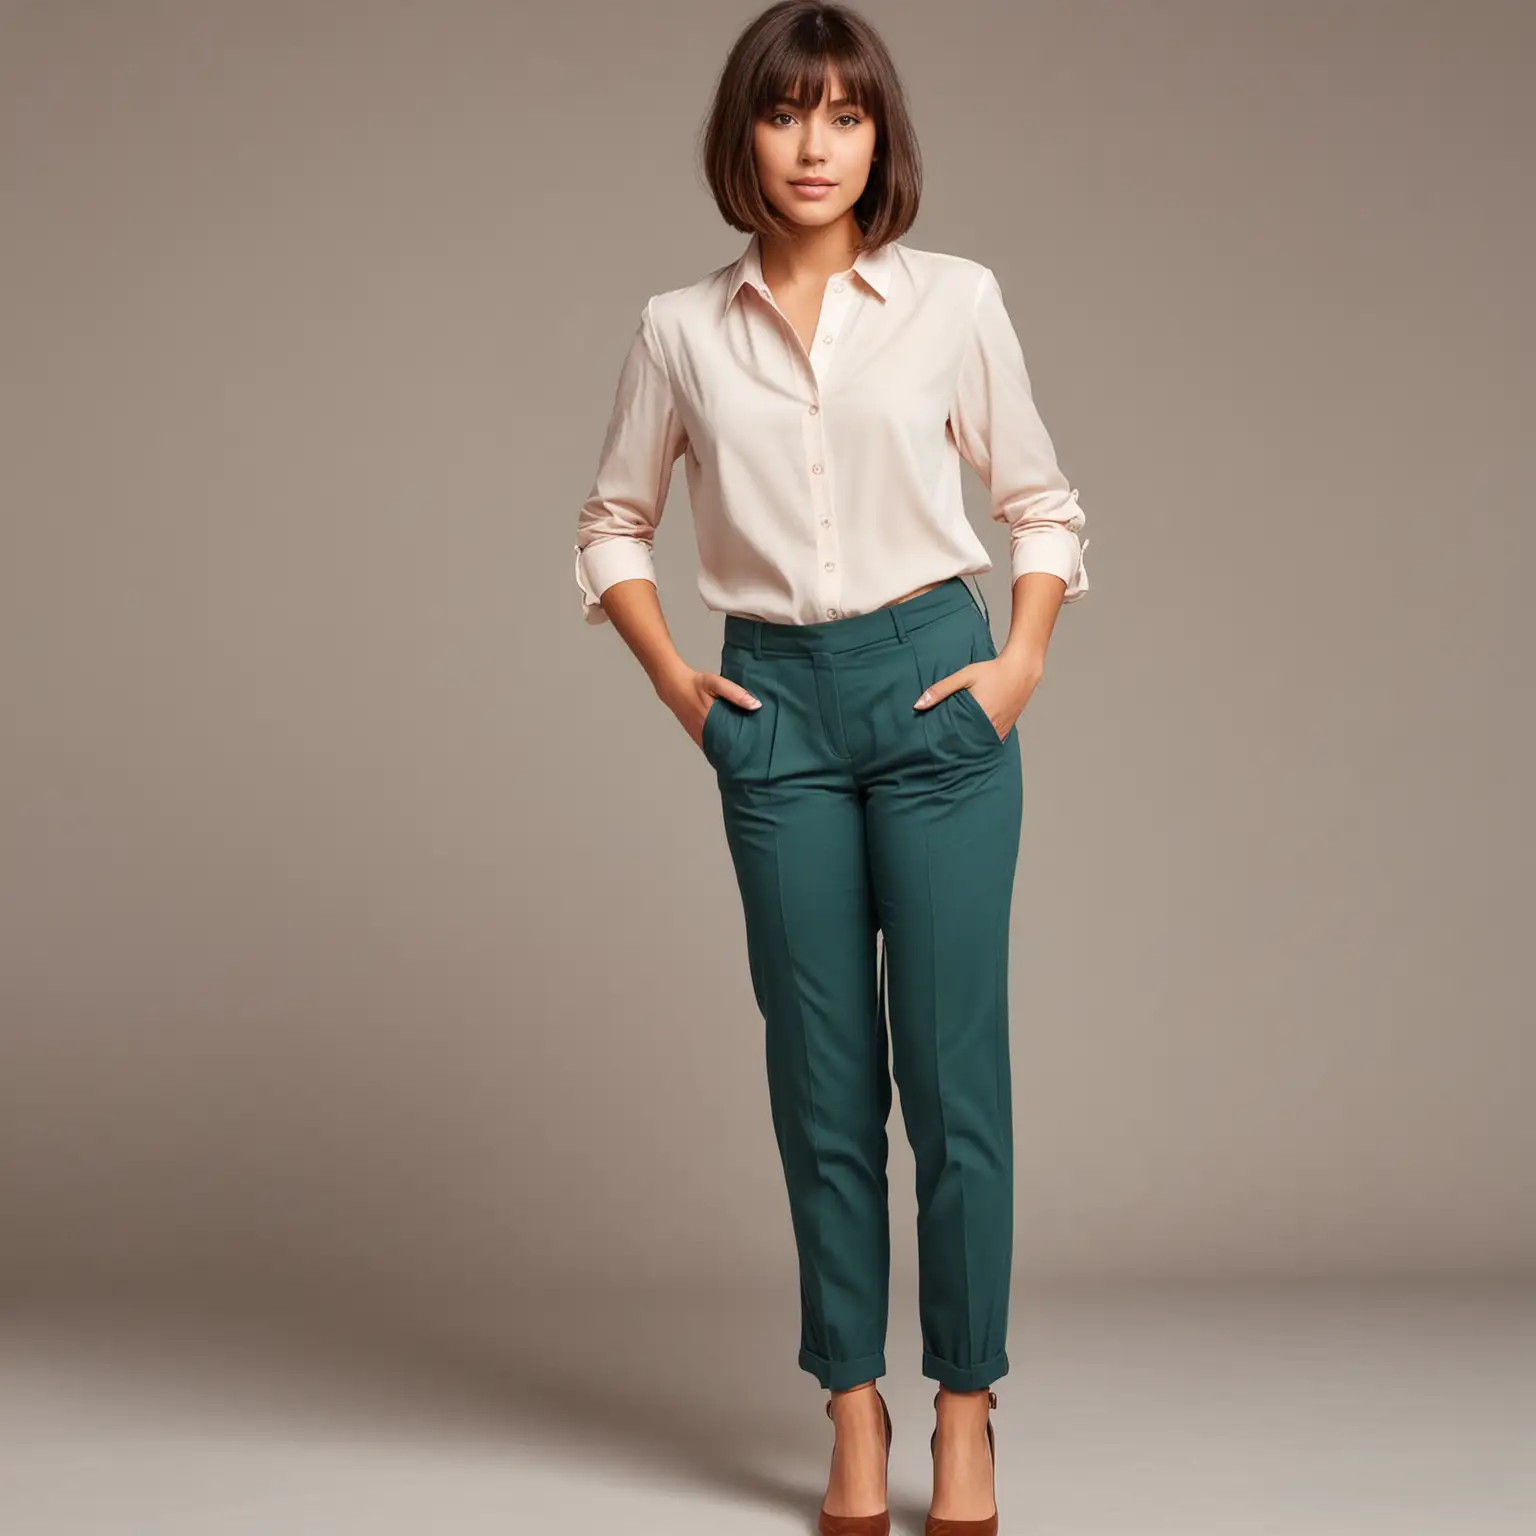 short bob brown hair with bangs latina teenage girl with tailored outfit and relaxed fit pants and blouse for a job interview. should look like a teen girl full body outfit with flats for shoes. 
